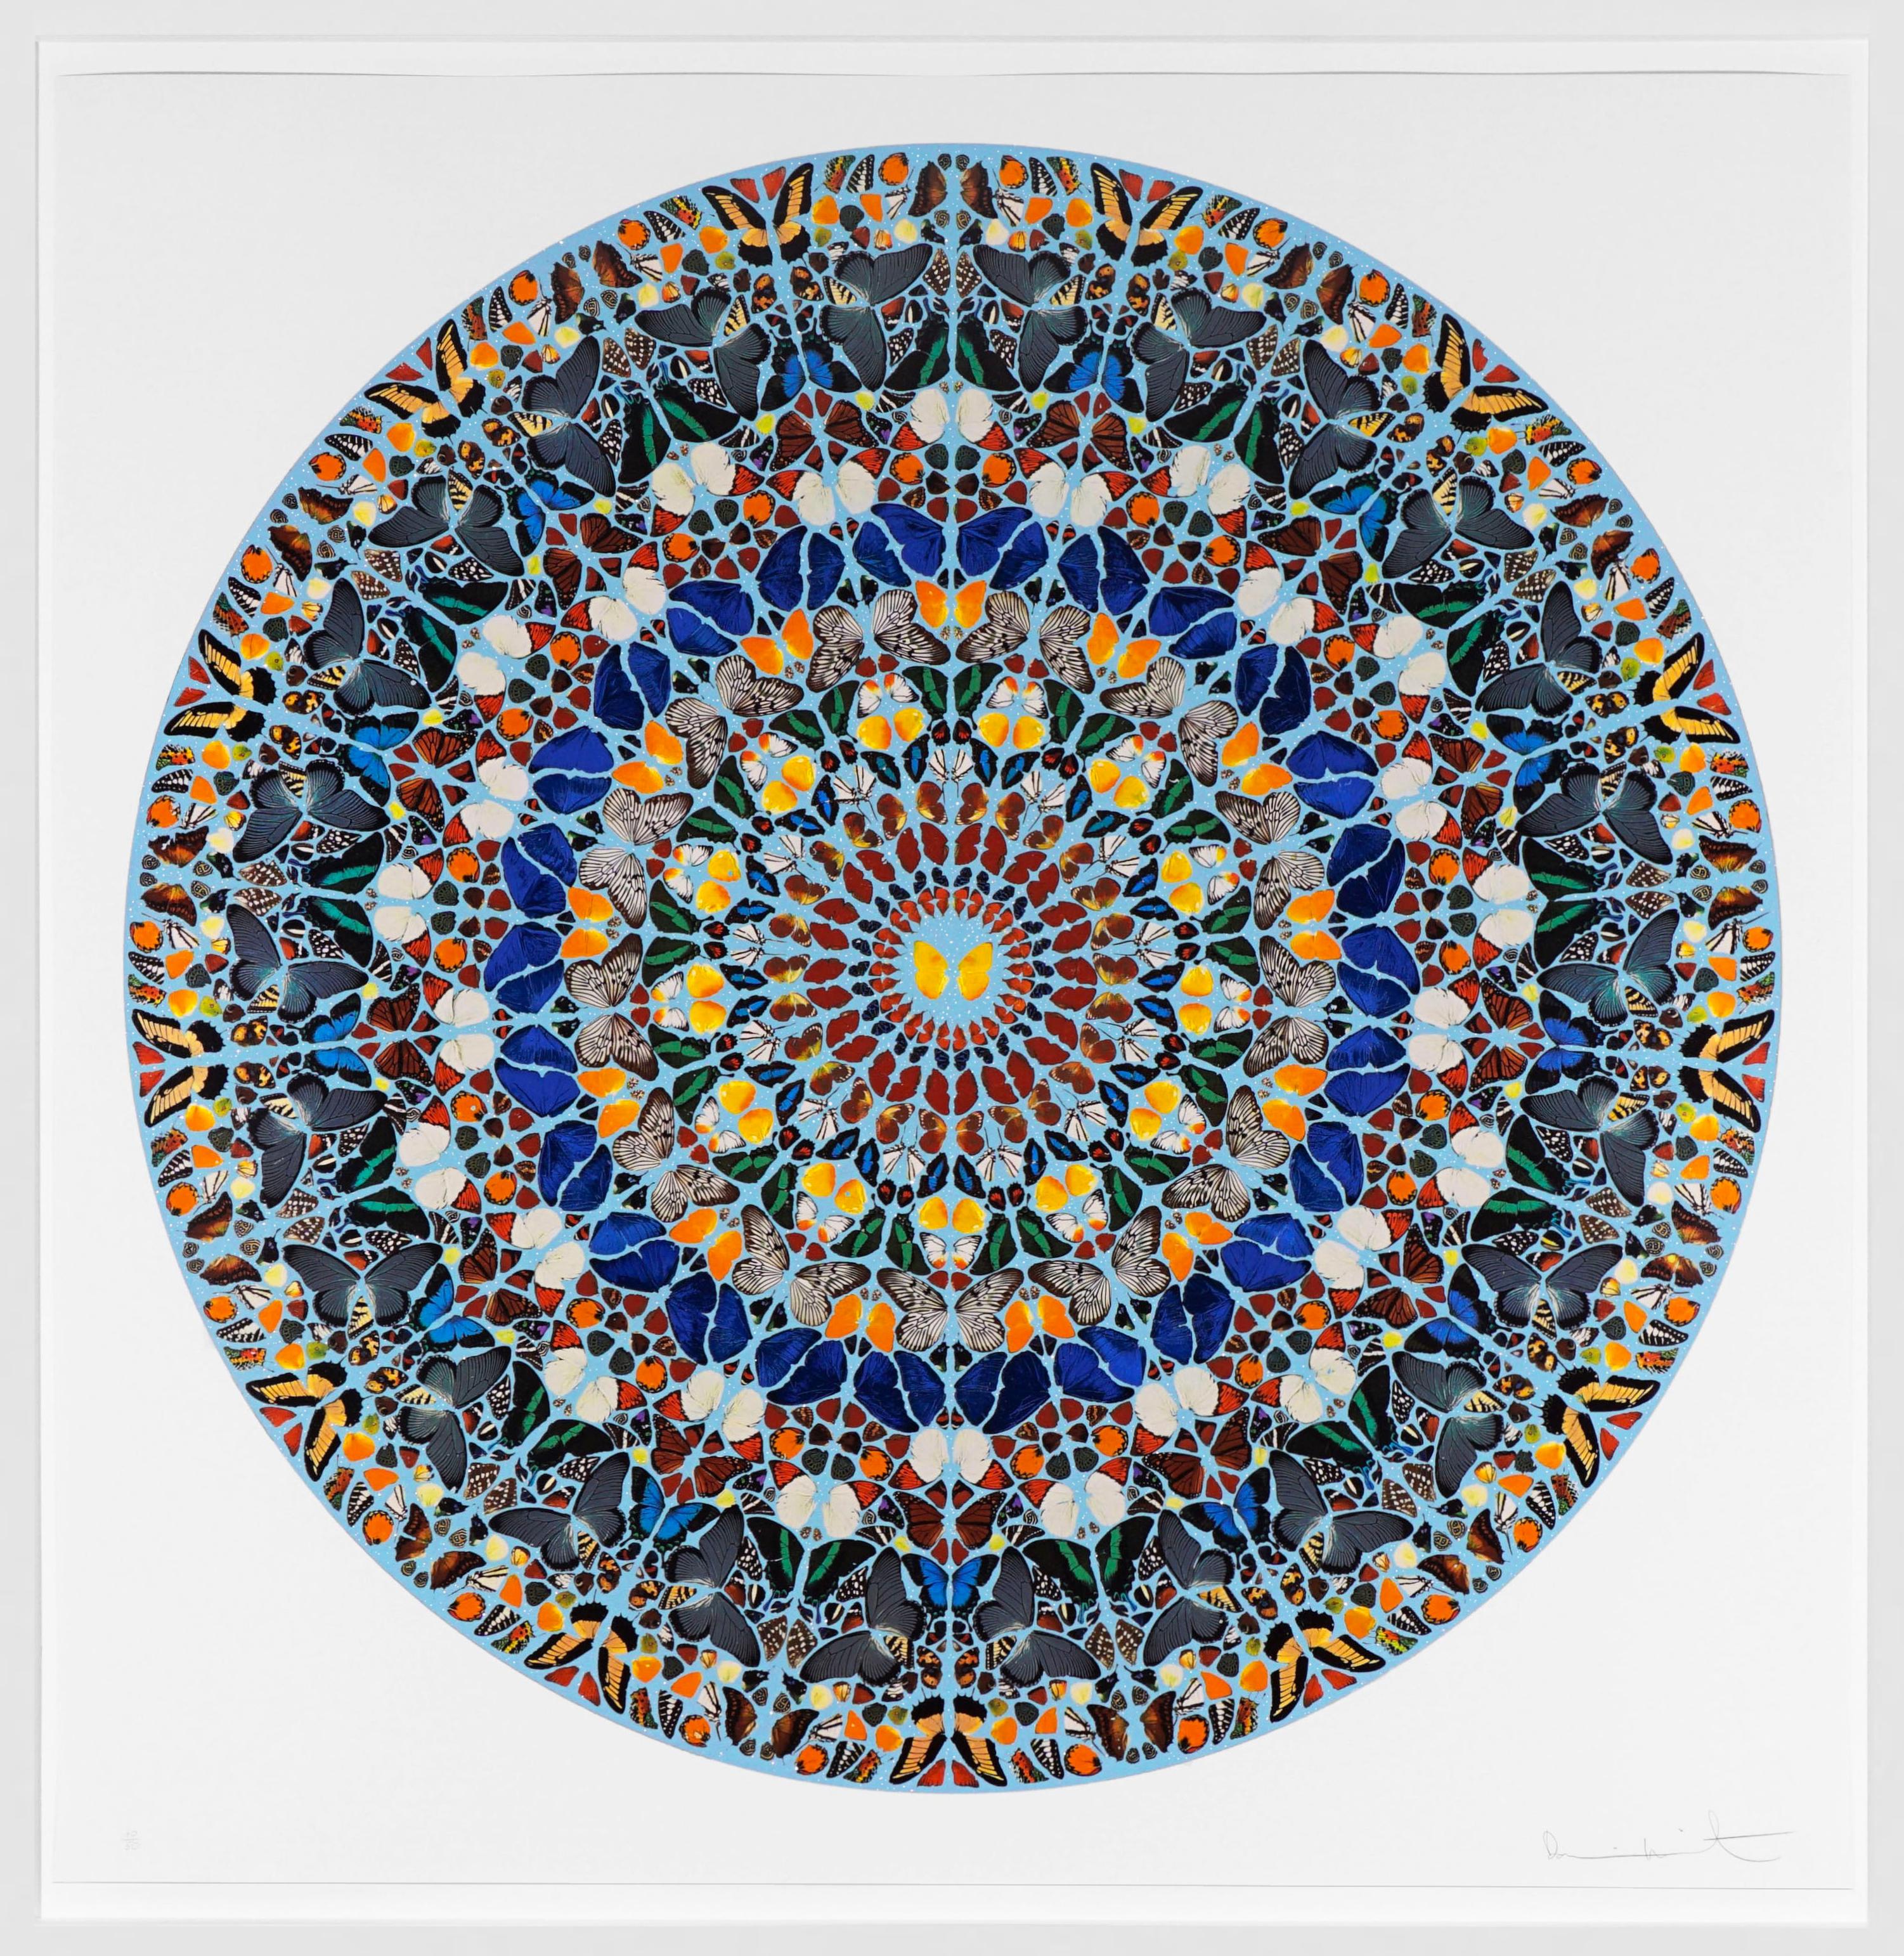 Damien Hirst, 'Mantra' Butterfly Kaleidoscope with Diamond Dust, 2011 1